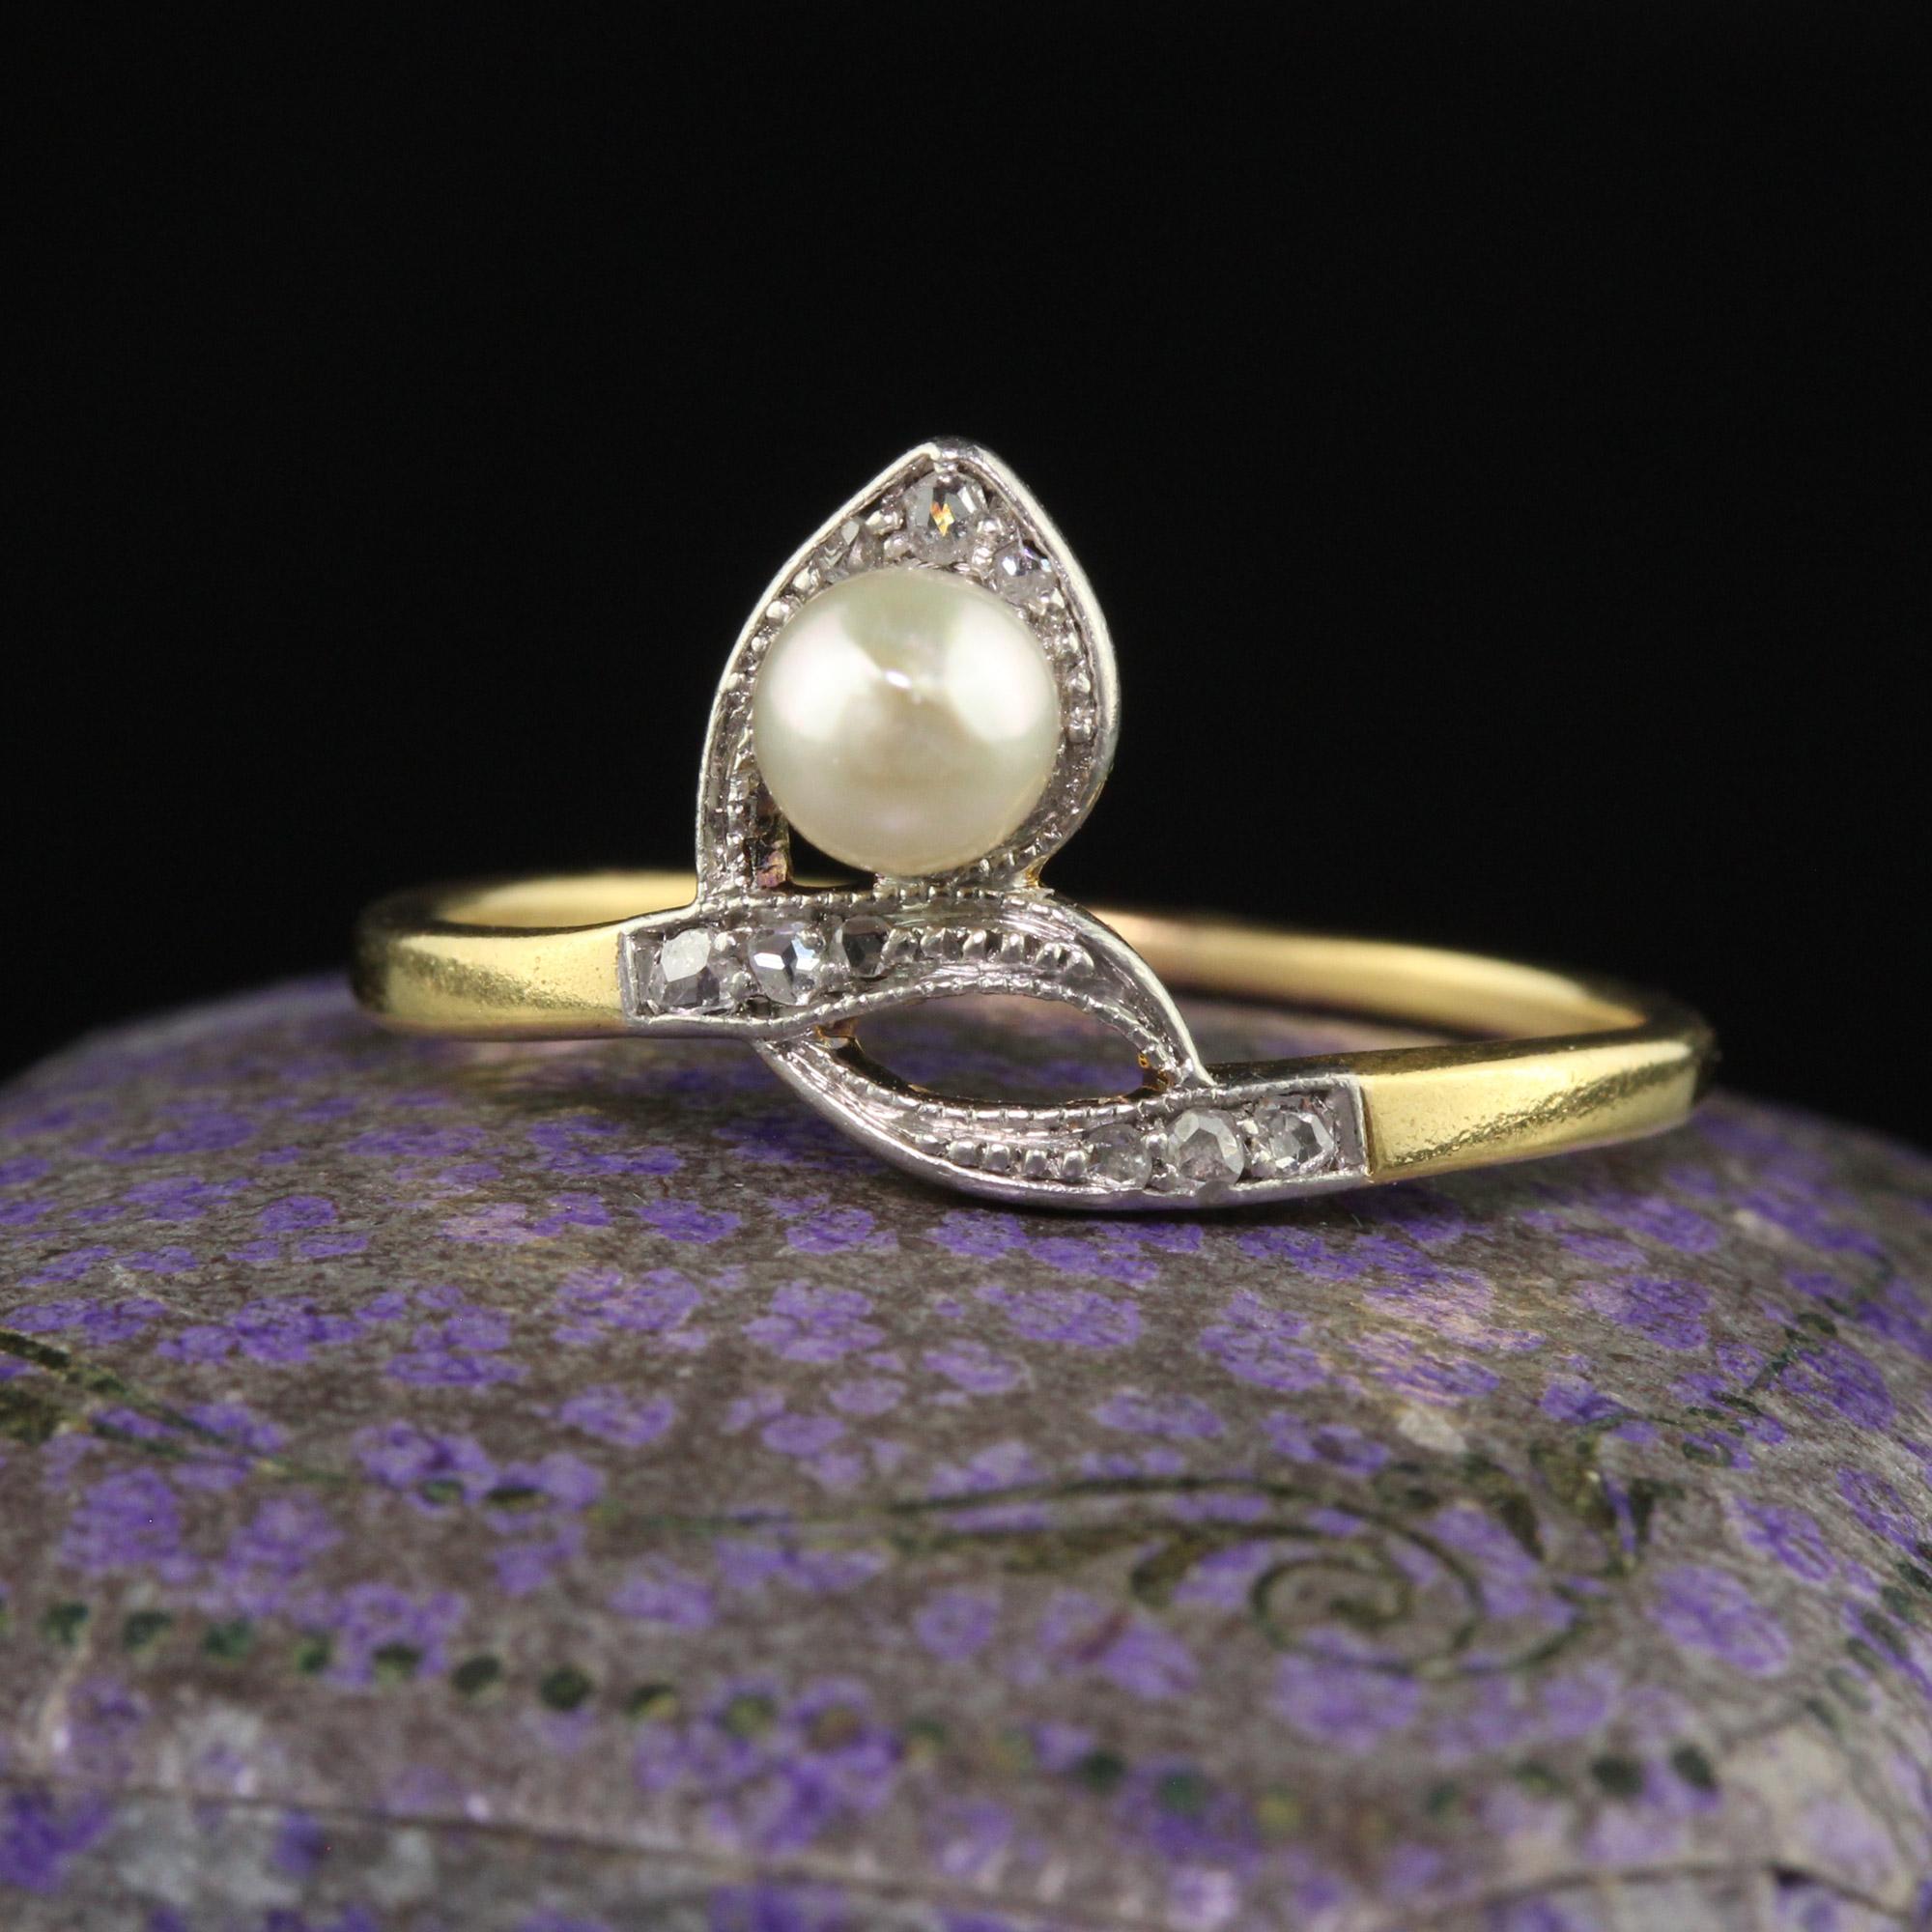 Beautiful Antique Art Deco 18K Yellow Gold Rose Cut Diamond and Pearl Ring. This beautiful ring is crafted in 18k yellow gold. The center holds a natural pearl that has rose cut diamonds on the top of the shank. The ring is in great condition and